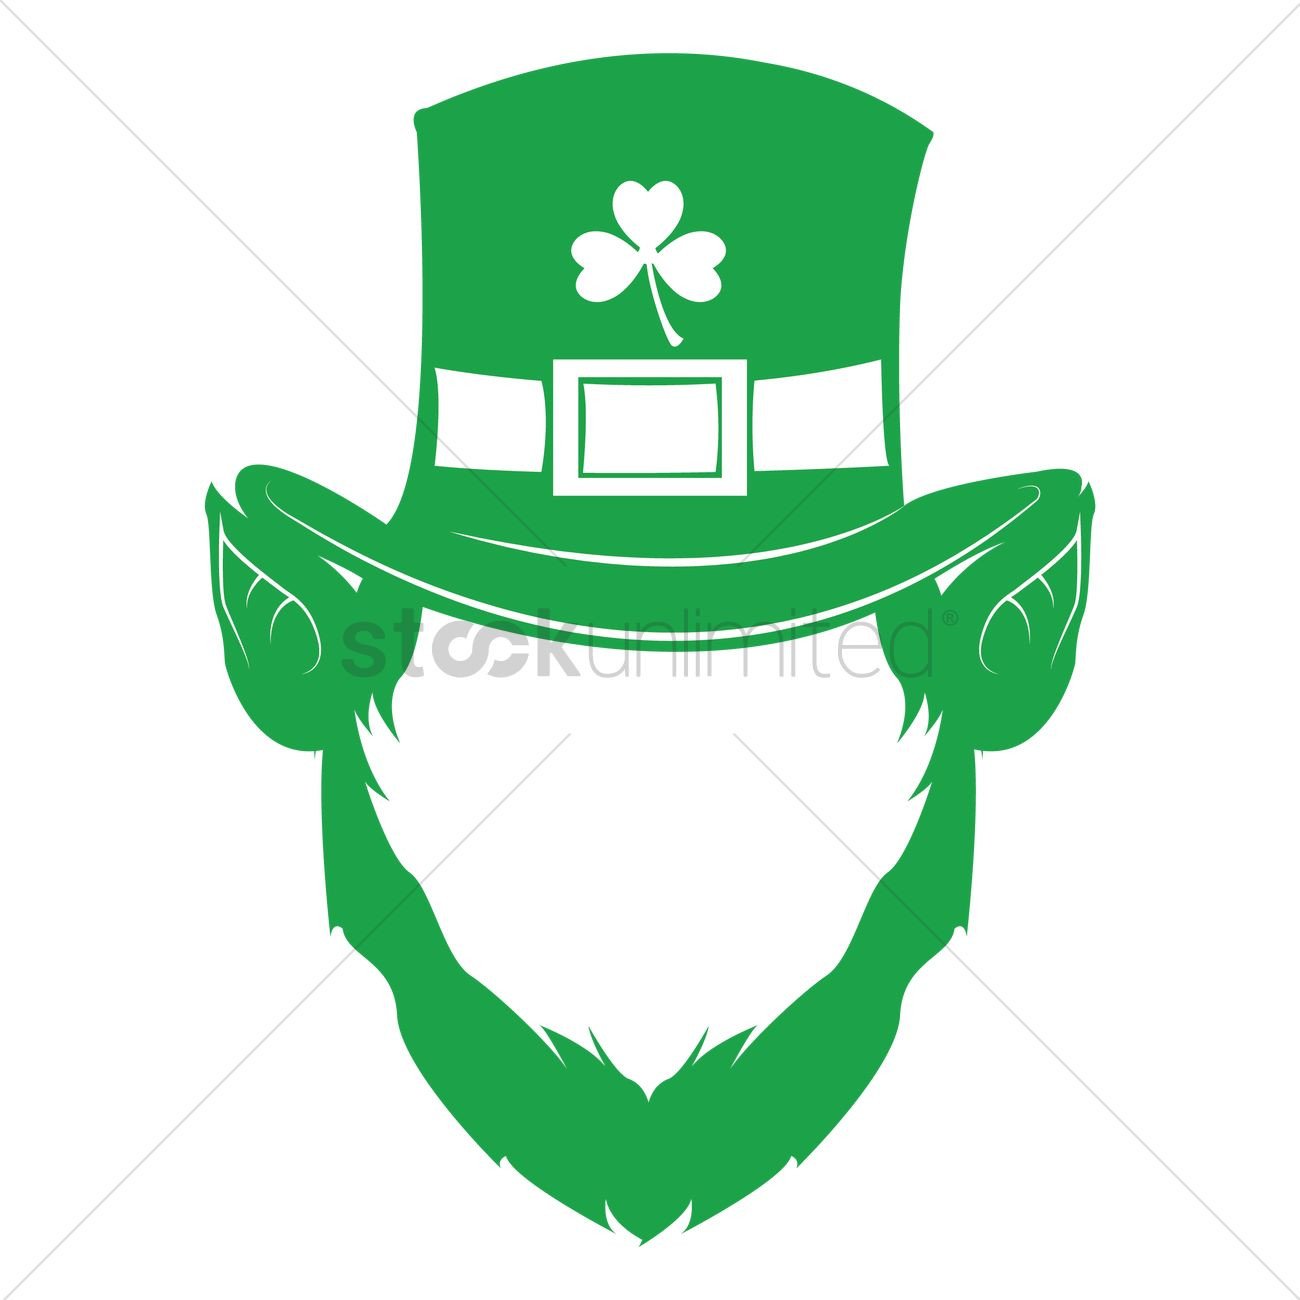 Leprechaun Hat and Beard Template Leprechaun Face with Hat and Beard Vector Image